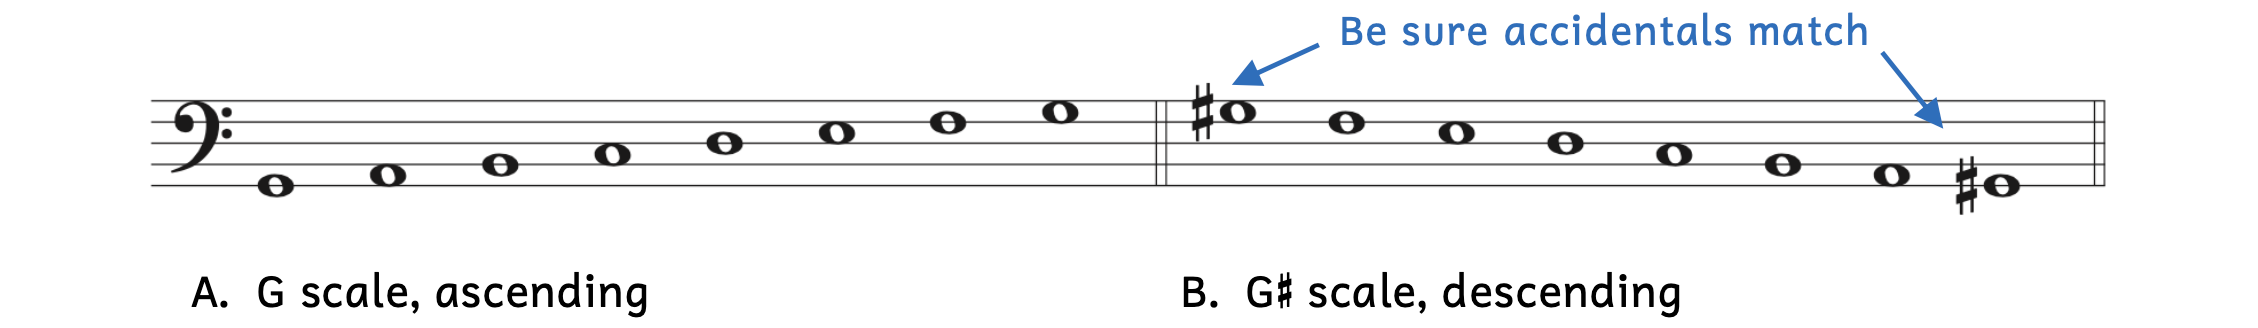 Step one: write out every note diatonically. In Example A, pitches are written diatonically in ascending order from G2 to G3. In example B, pitches are written diatonically in descending order from G-sharp3 to G-sharp2. Be sure accidentals match for the first and last note of the scale.